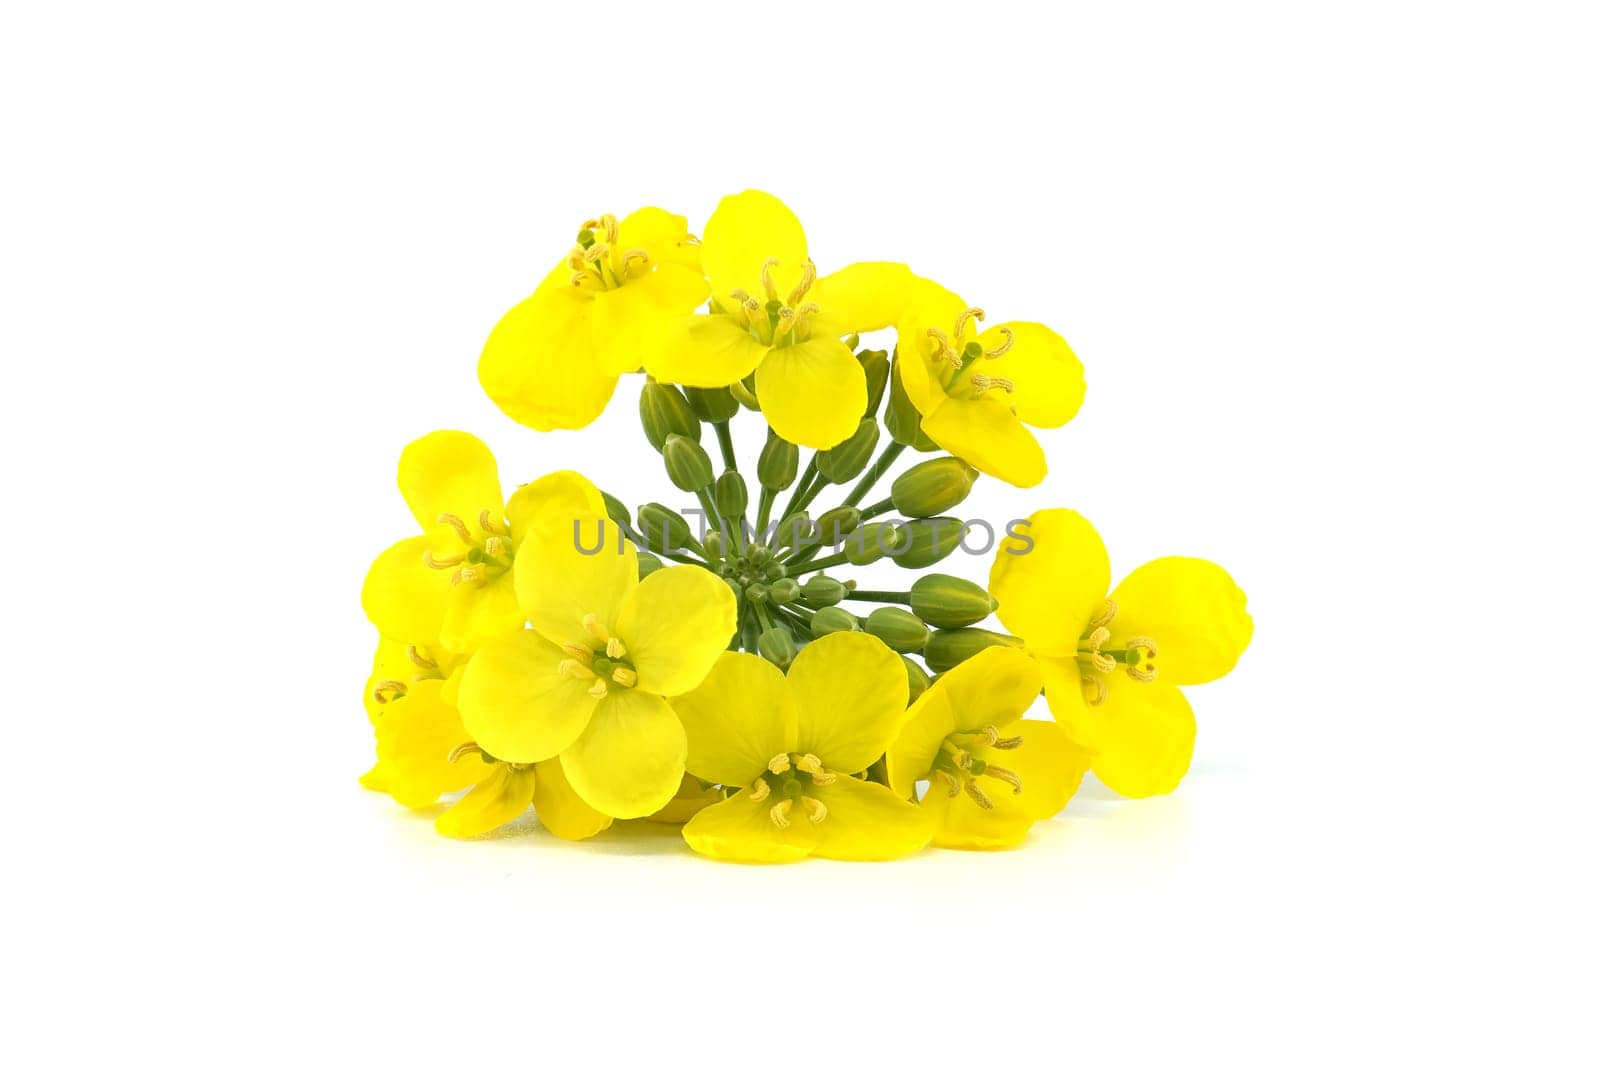 Vibrant yellow oilseed rape blossoms isolated on white background